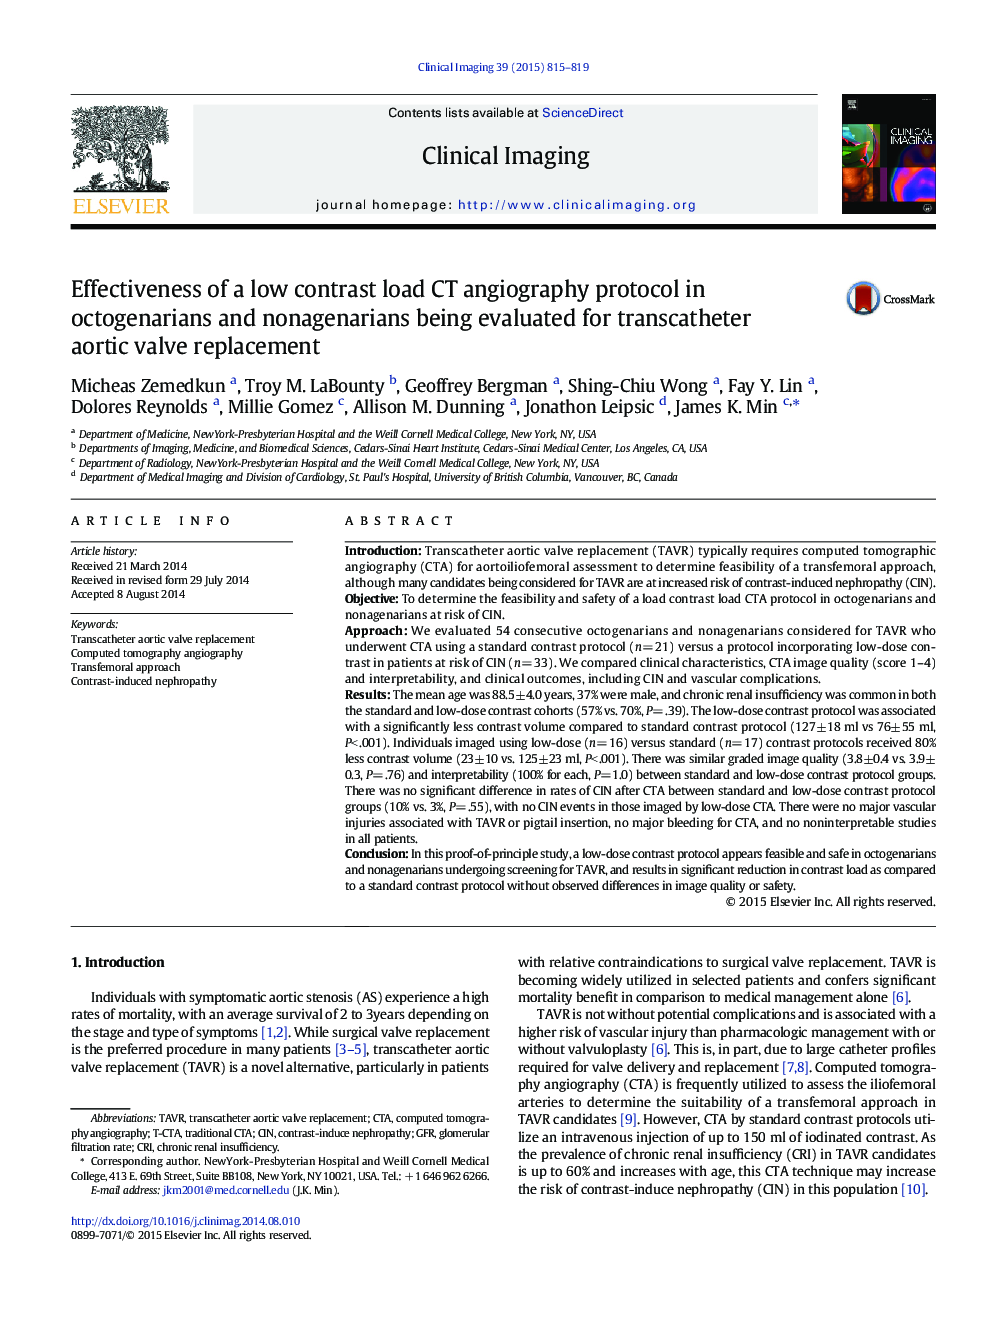 Effectiveness of a low contrast load CT angiography protocol in octogenarians and nonagenarians being evaluated for transcatheter aortic valve replacement